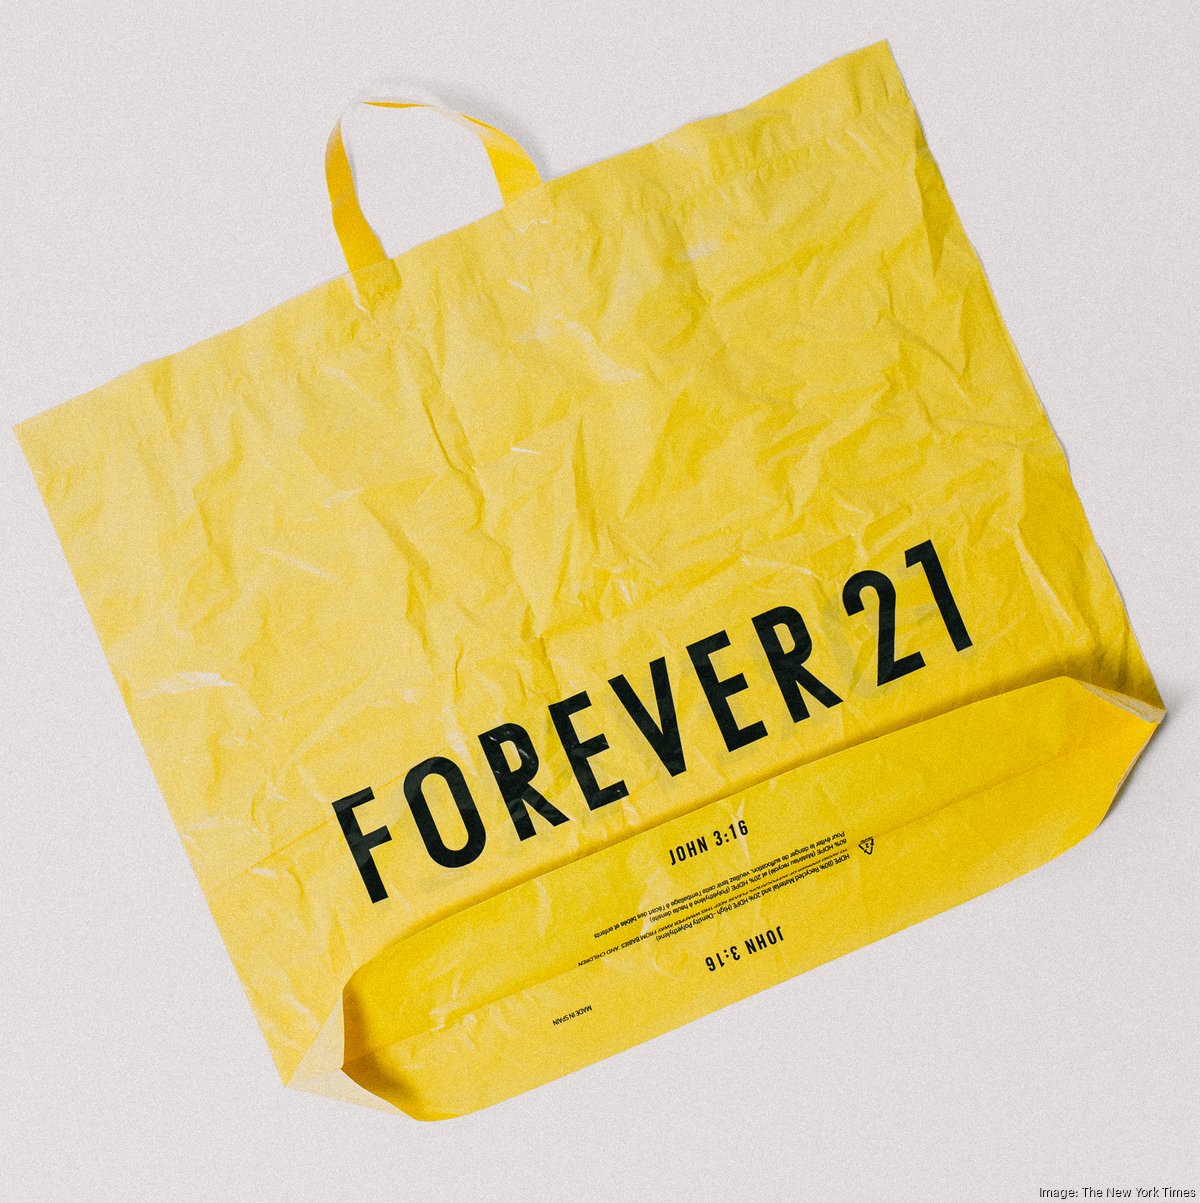 Mall owners are among group bidding $81M for Forever 21